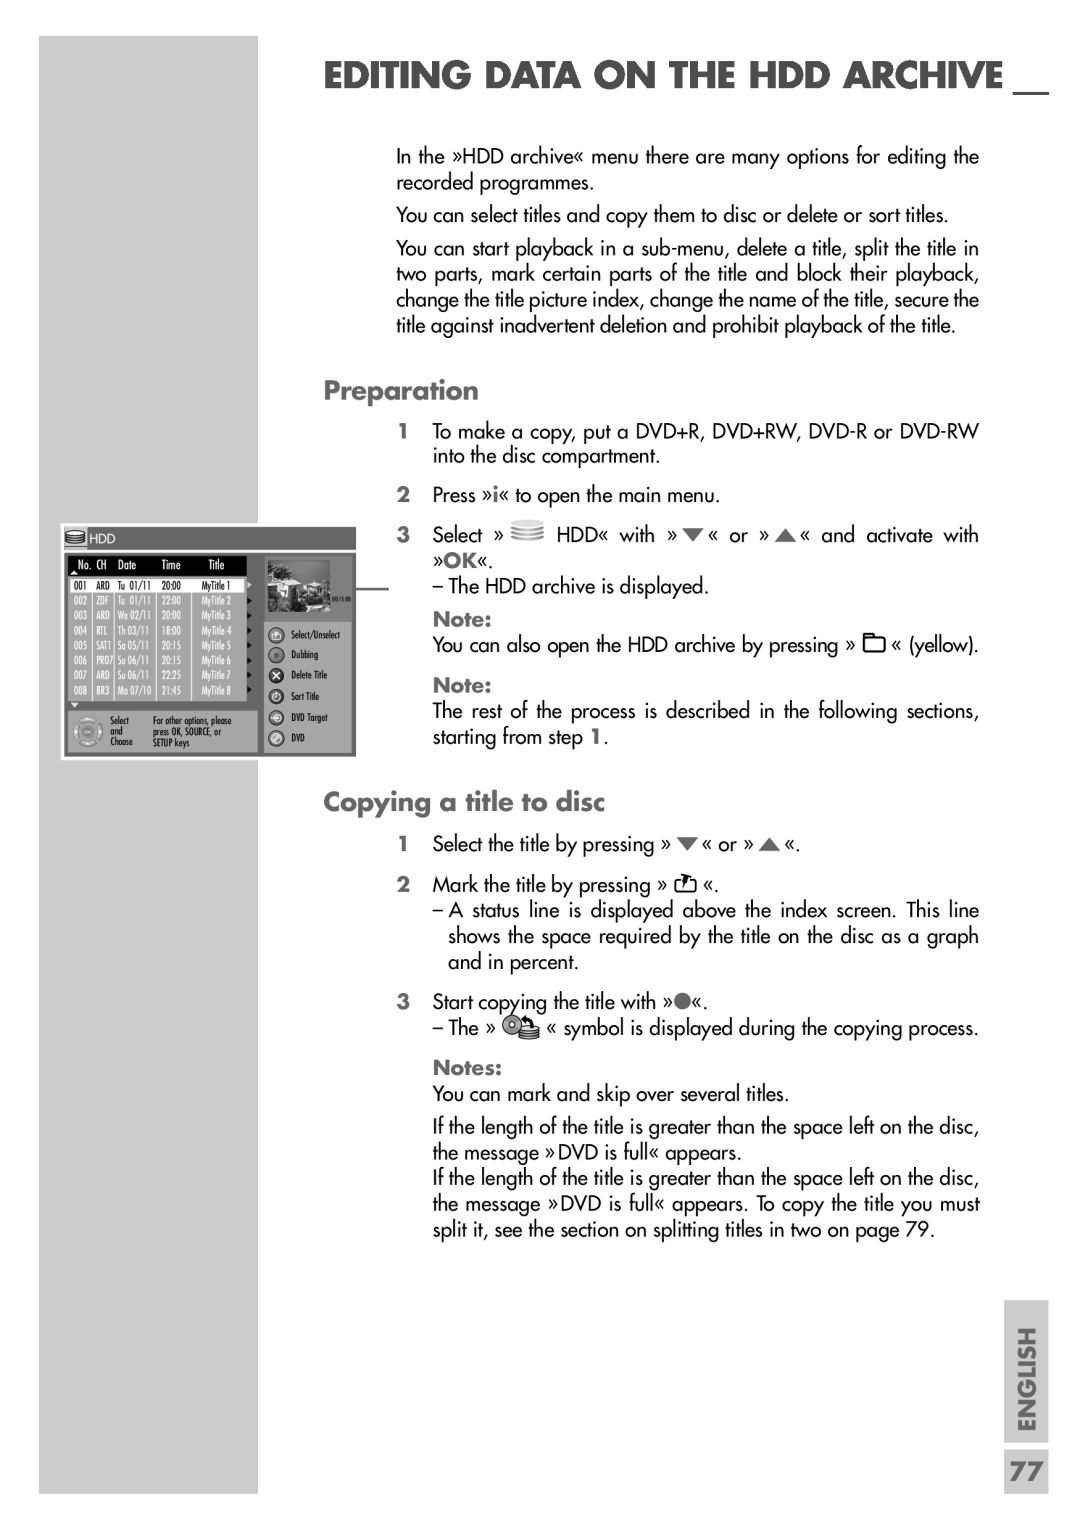 Grundig 5550 HDD manual Editing Data On The Hdd Archive, Copying a title to disc, Preparation, English 